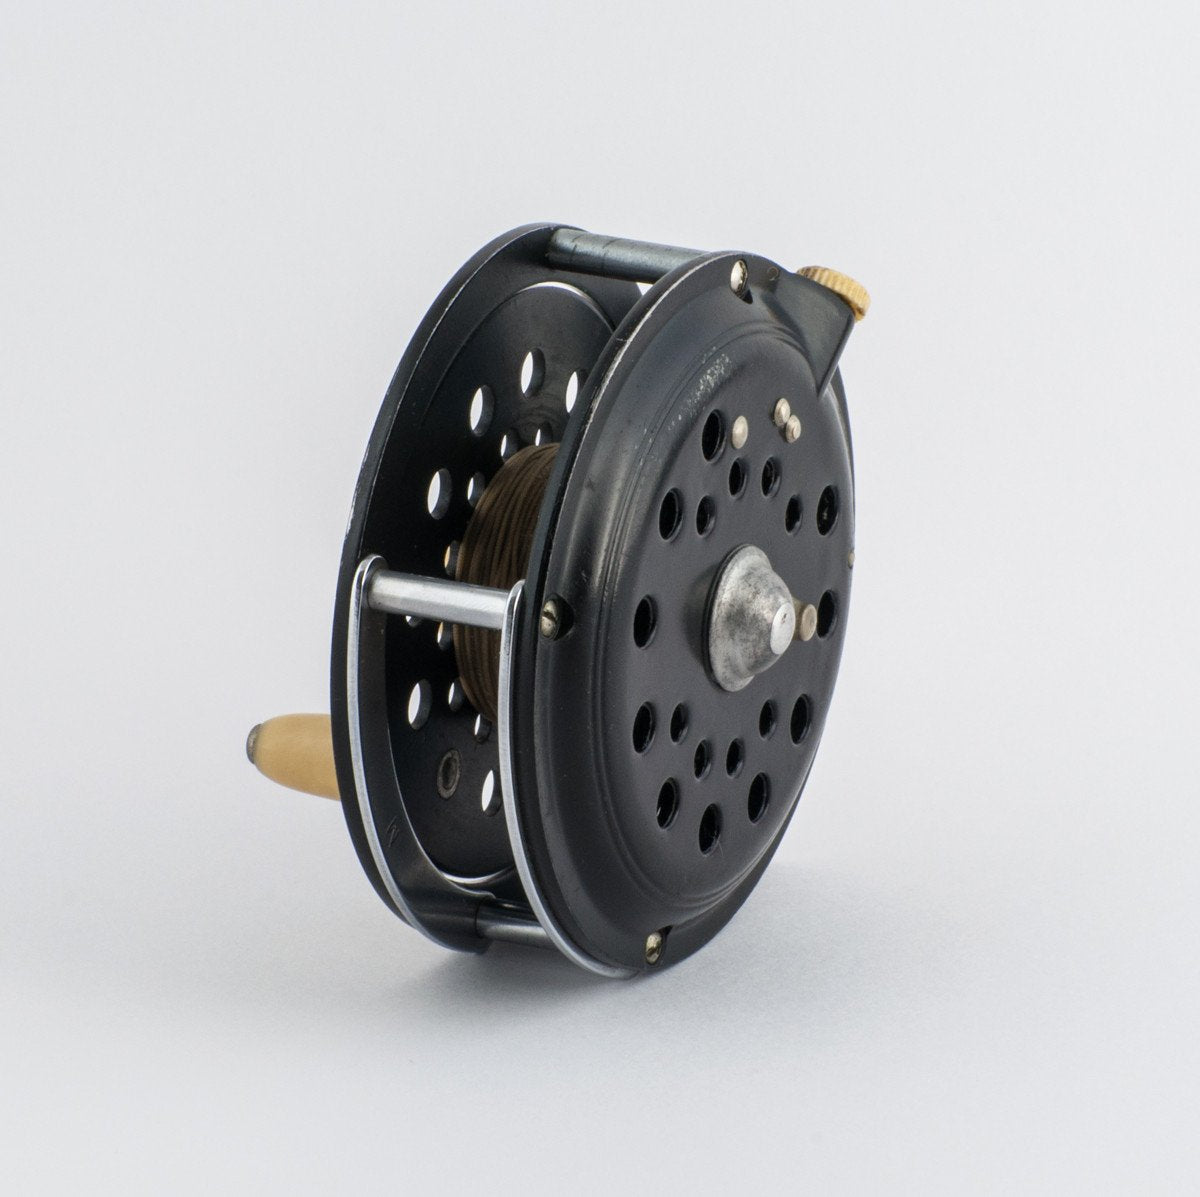 Pflueger Medalist Fly Fishing Reel with Extra Spool